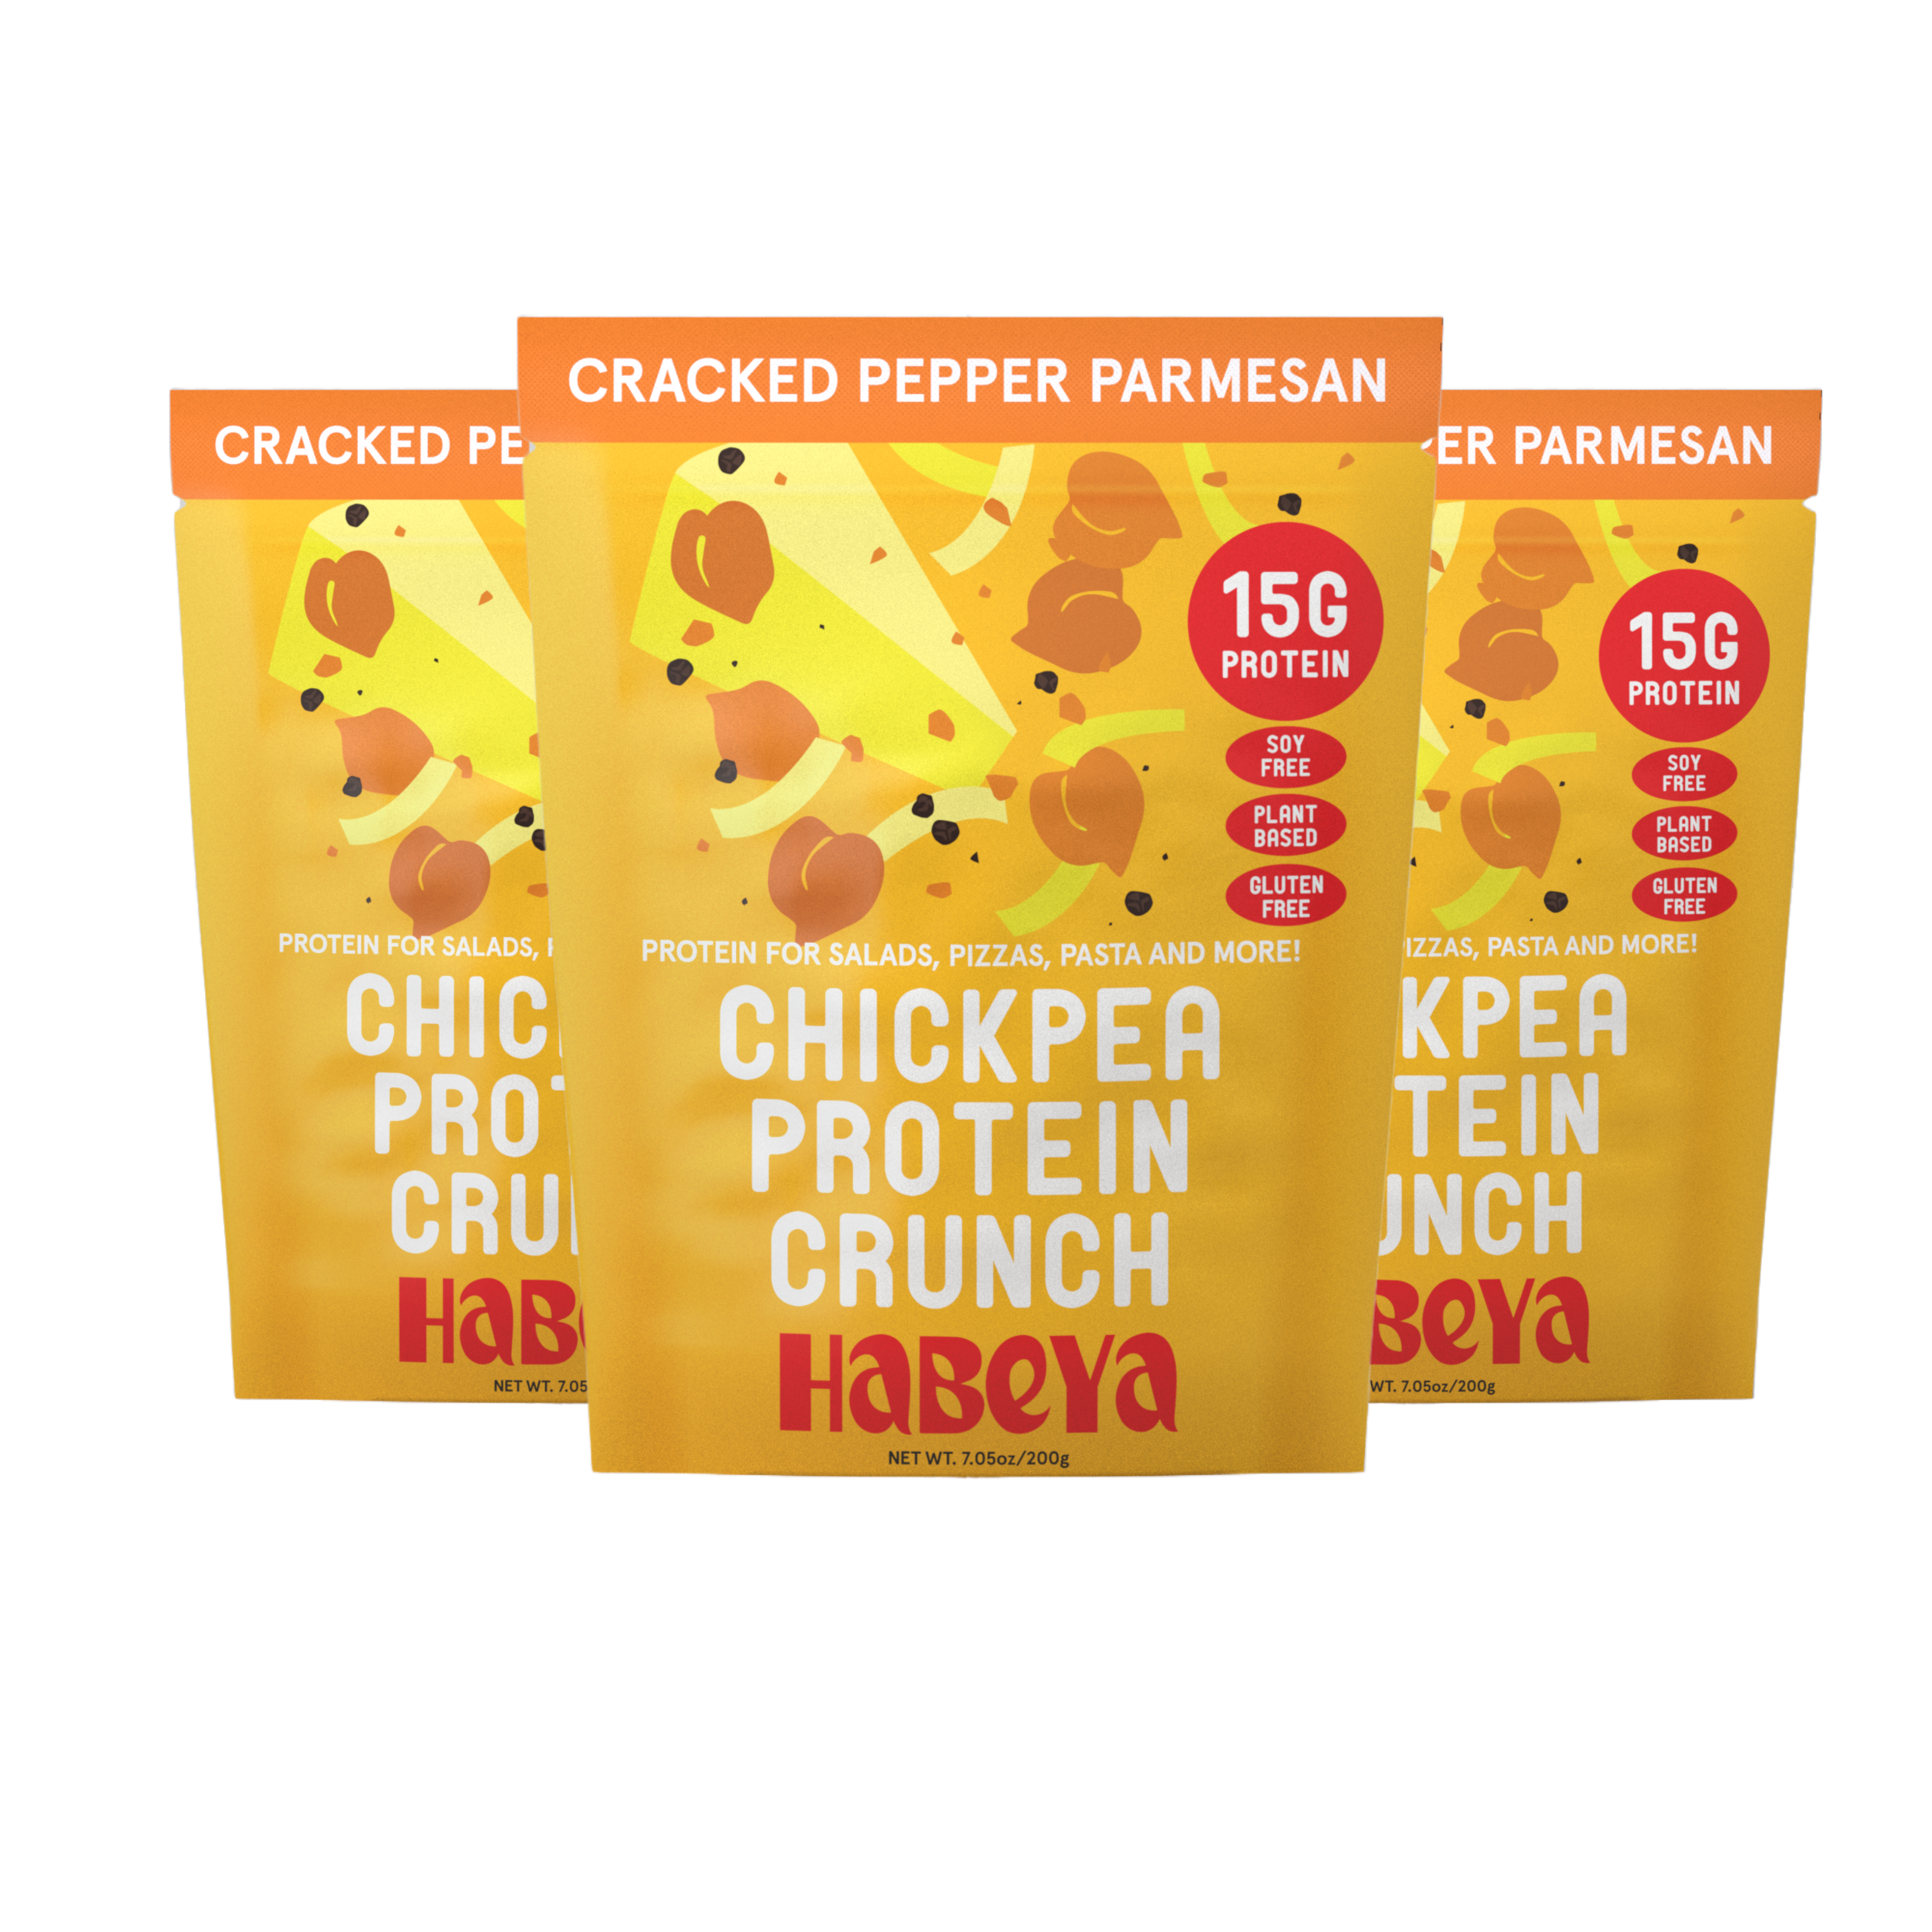 Cracked Pepper Parmesan Chickpea Protein Crunch (3 pack)